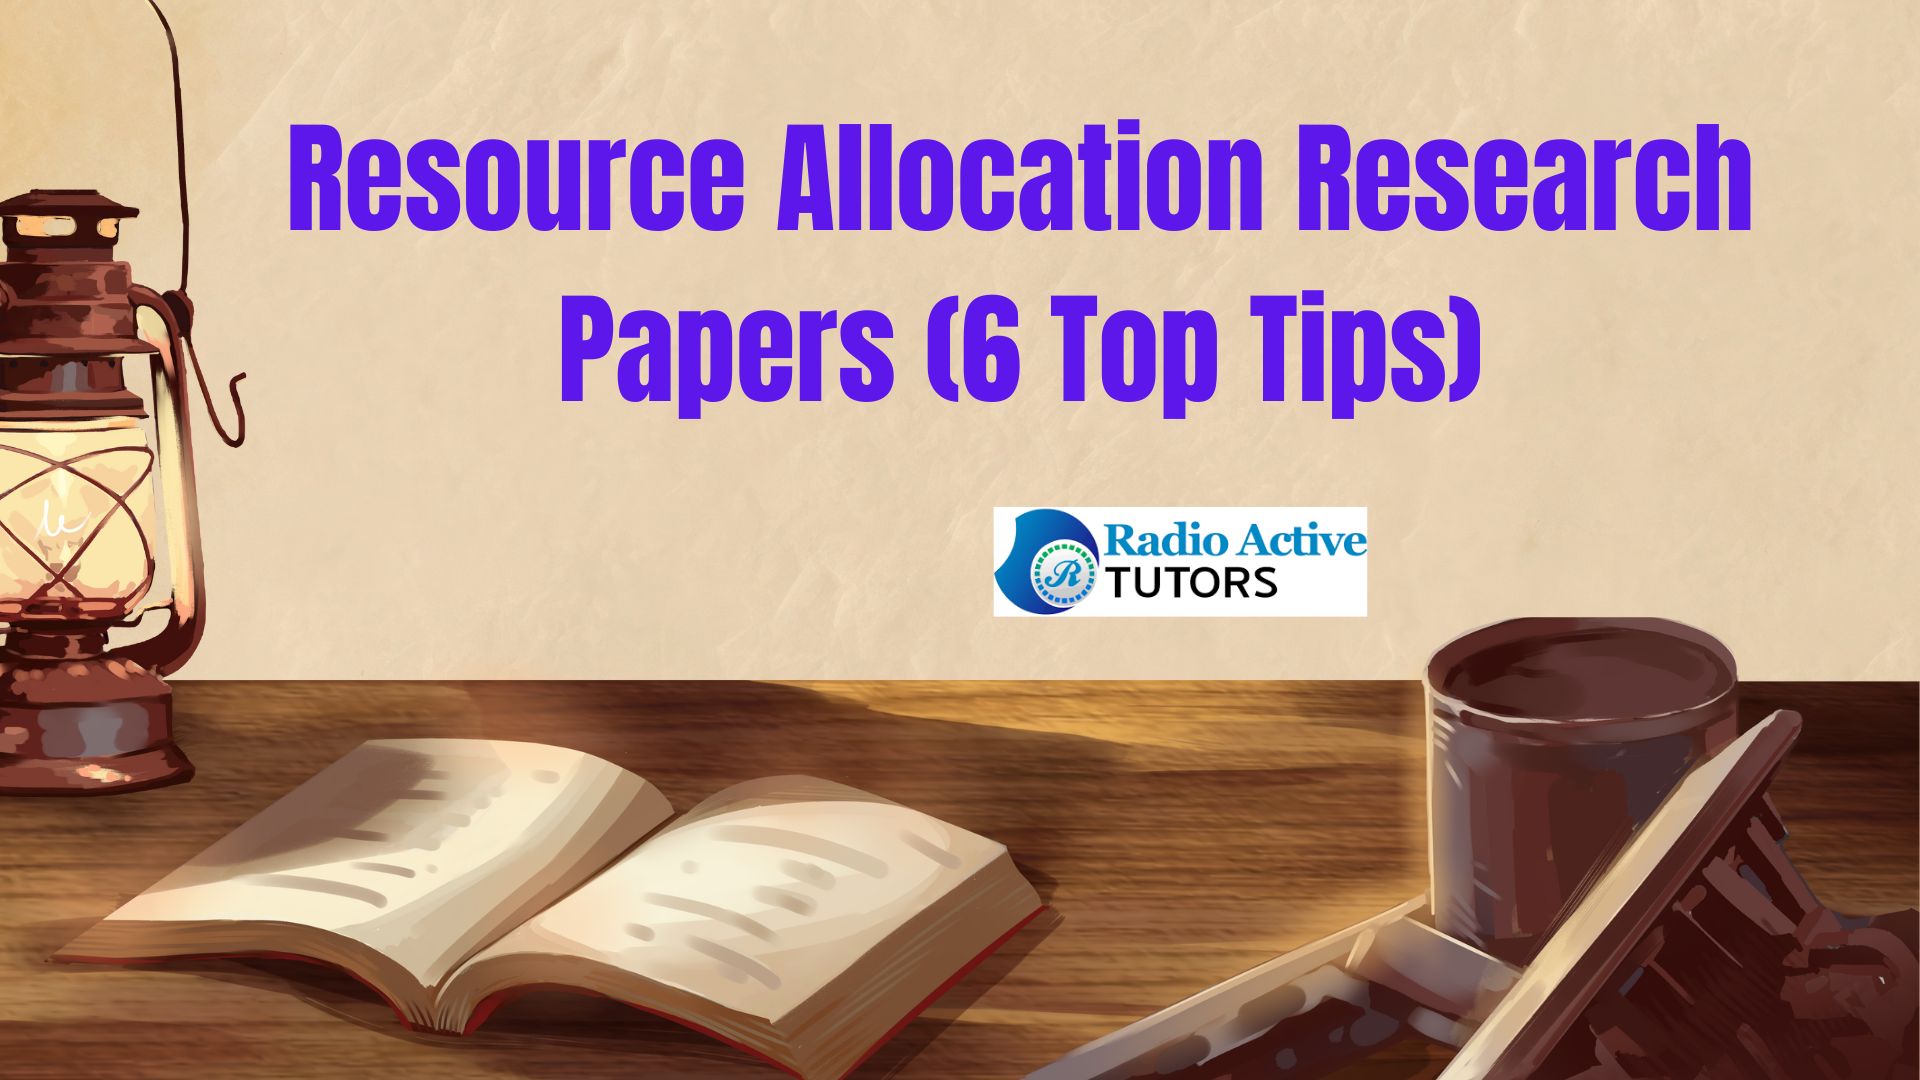 Resource Allocation Research Papers (6 Top Tips)